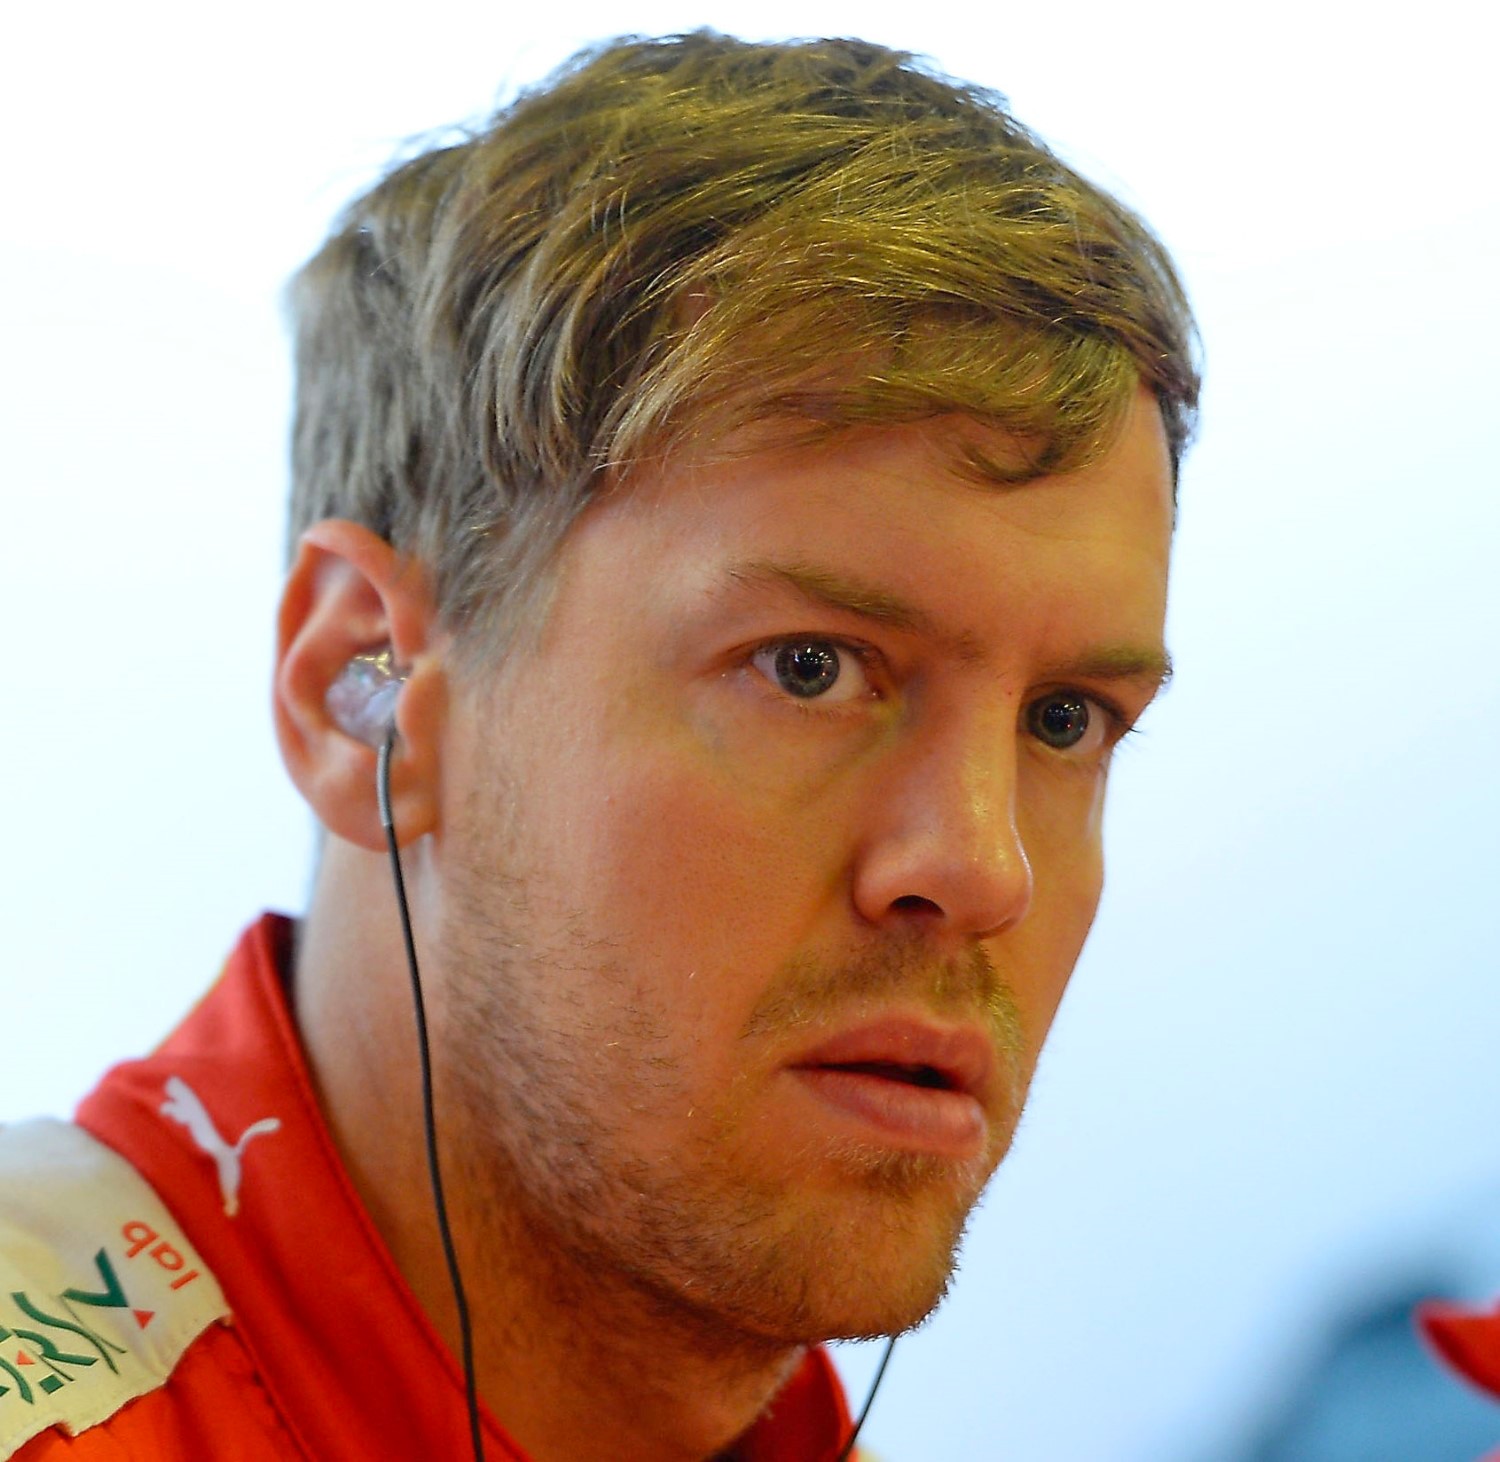 Vettel knows the car is 98% of the equation in F1. It has become an engineering endeavor